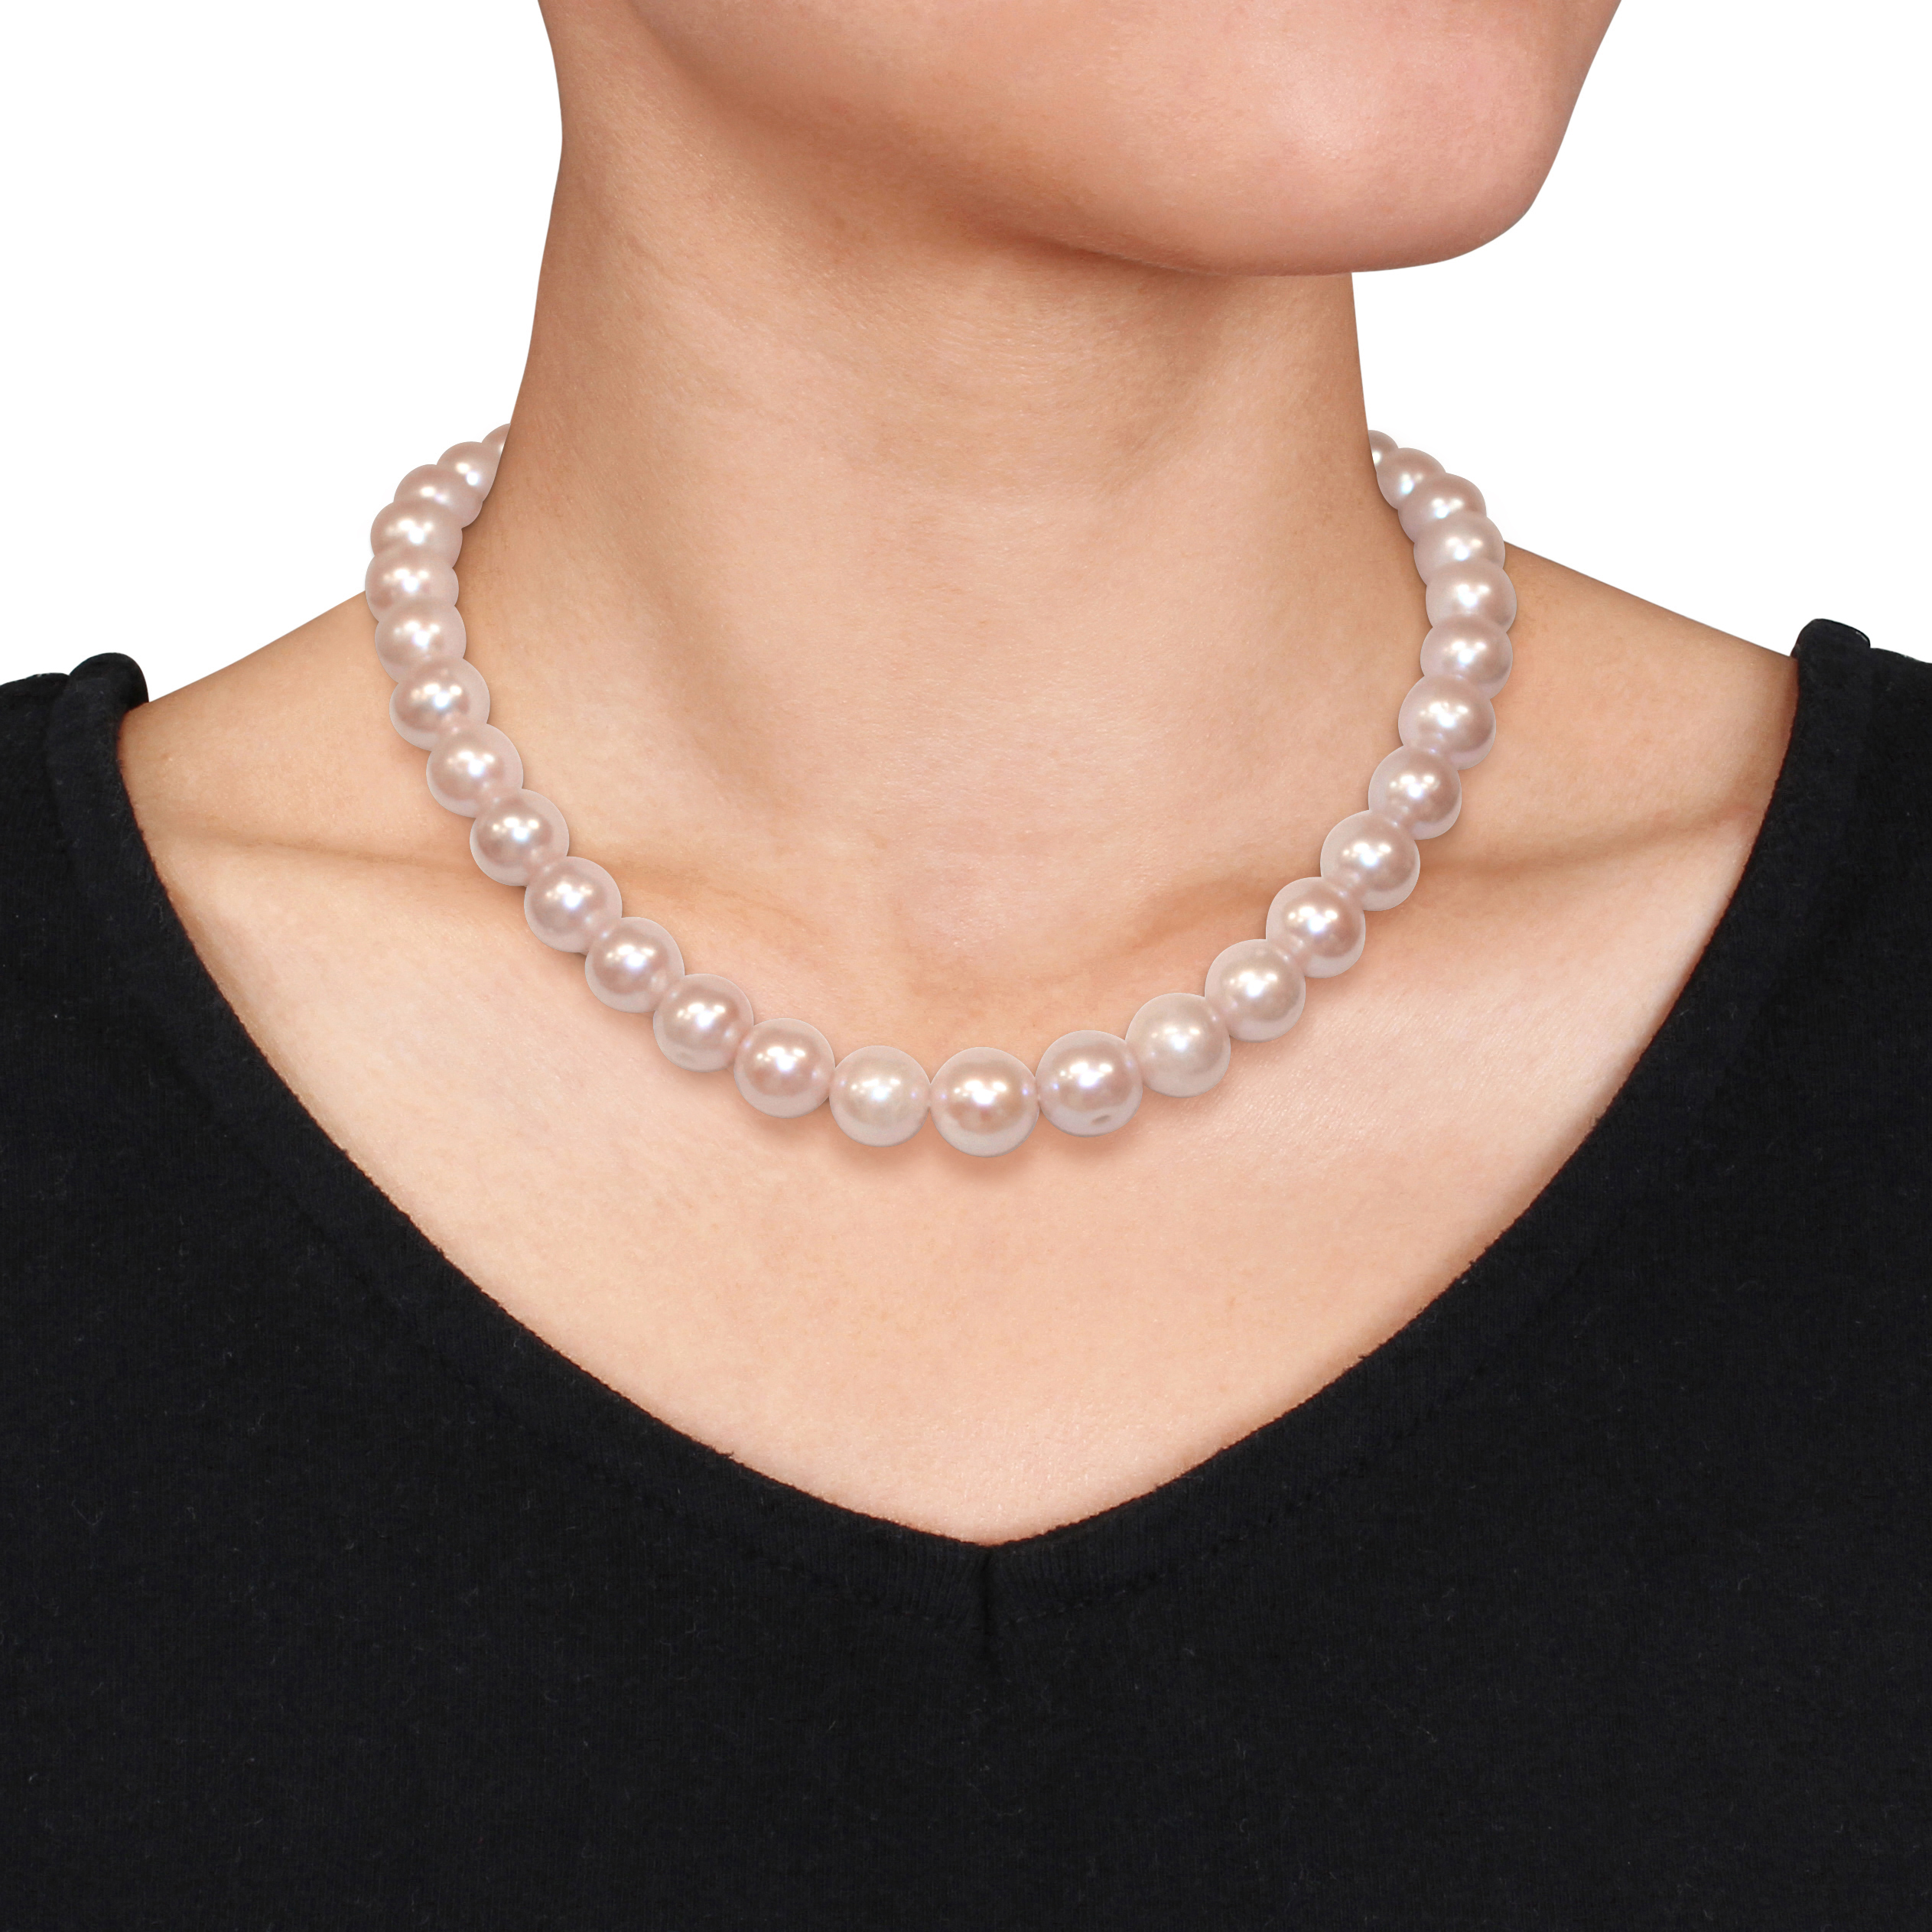 11-11.5MM Pink Freshwater Cultured Pearl Necklace with 14k White Gold Diamond Accent Ball Clasp - 18 in